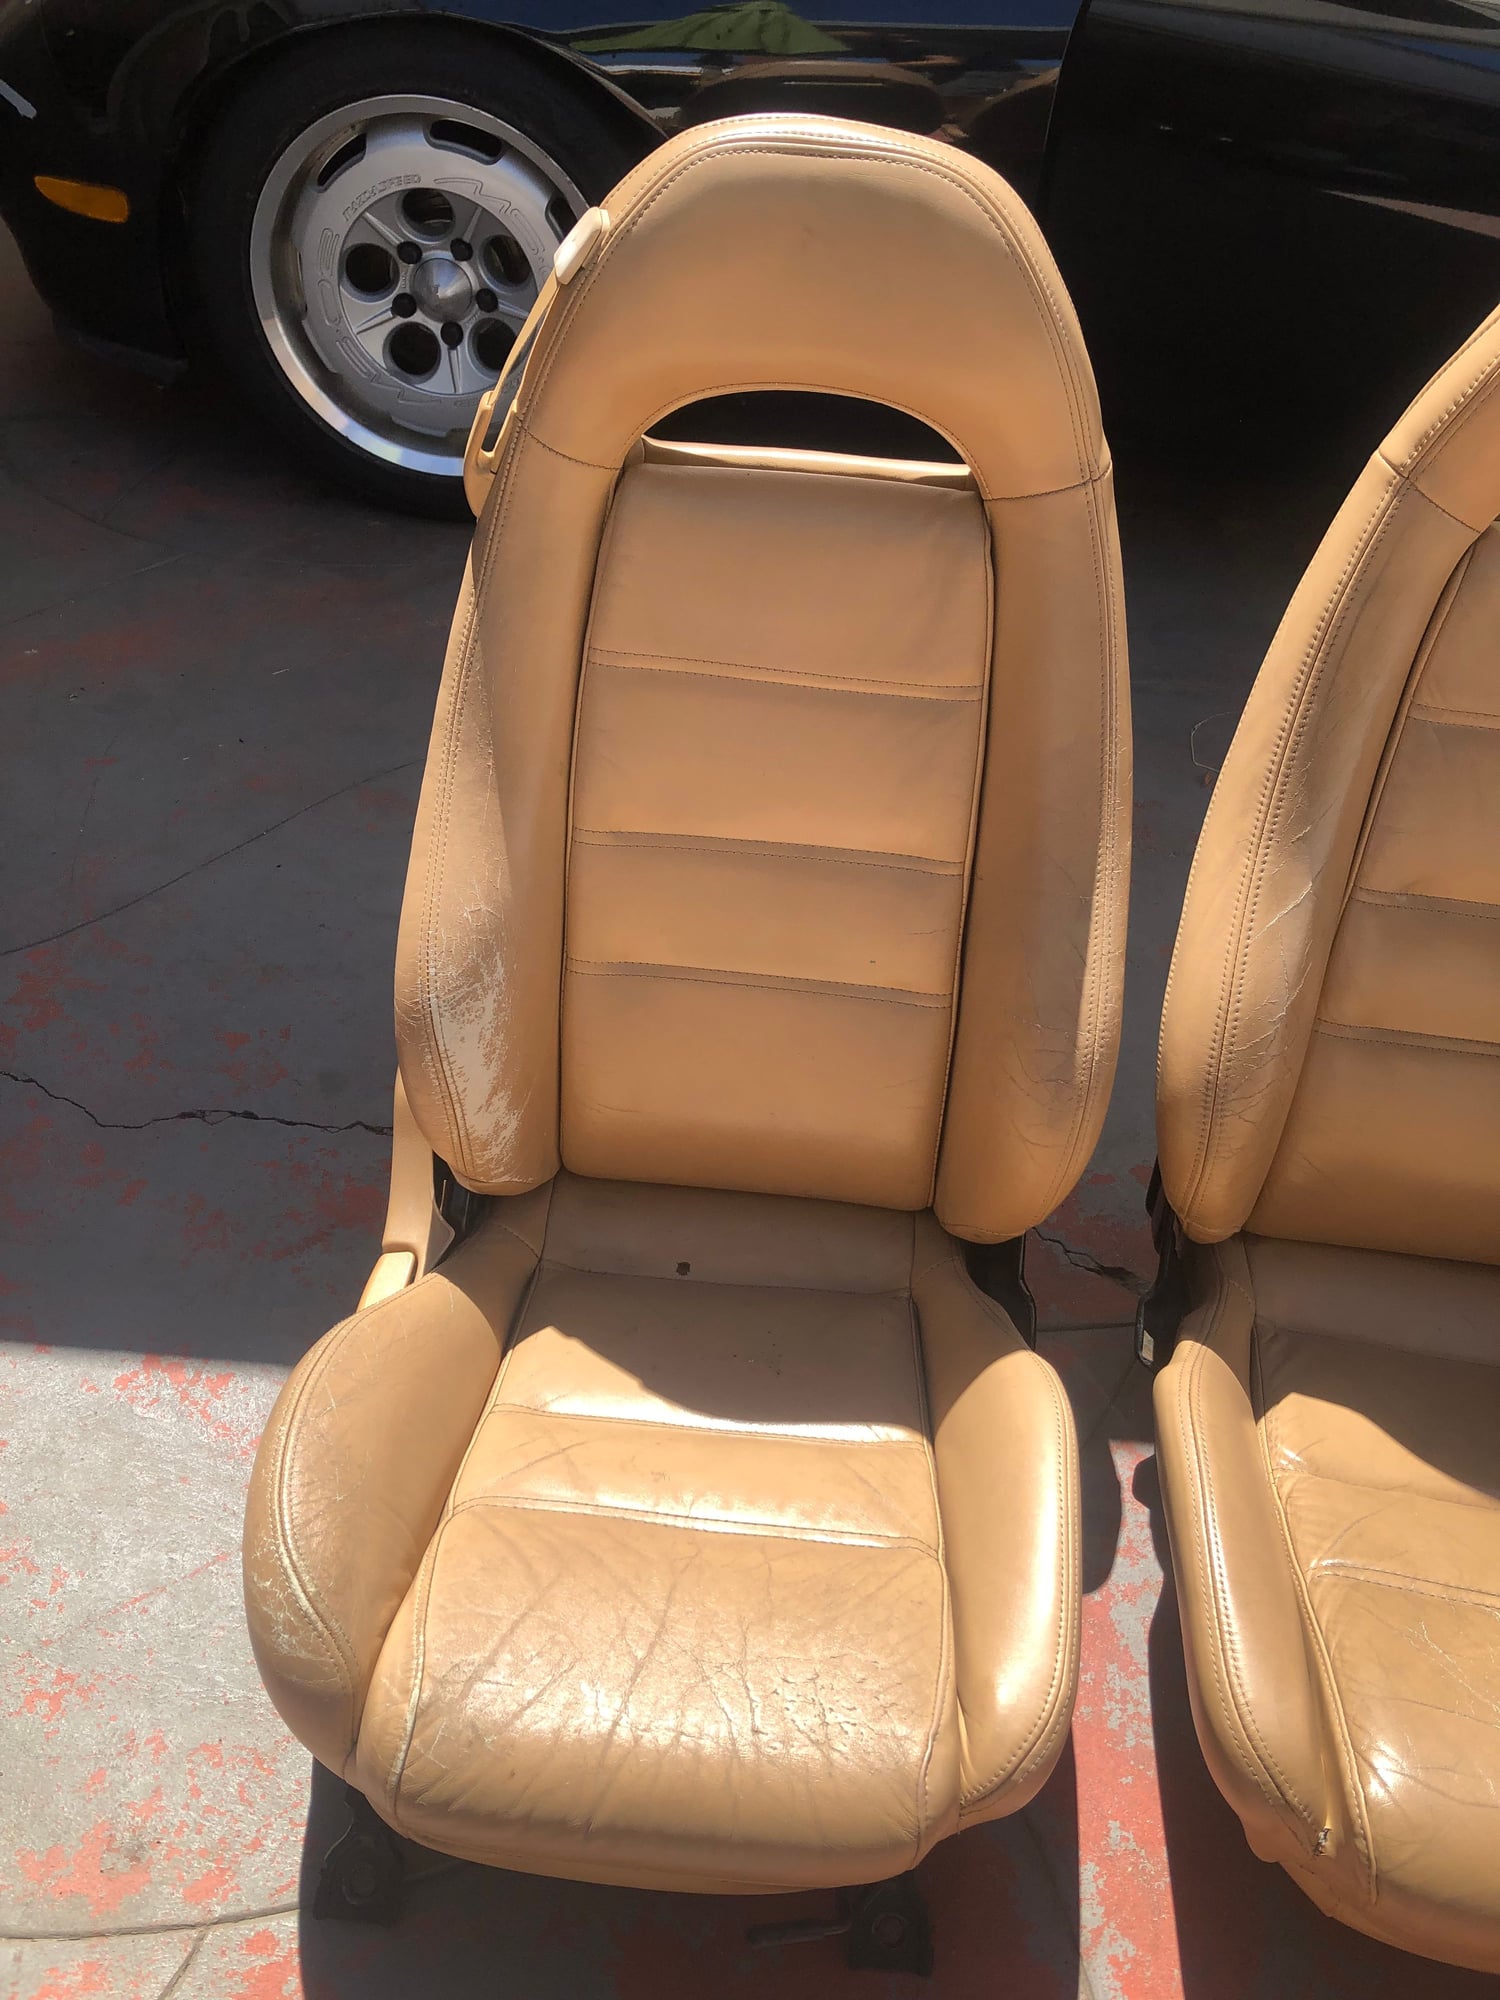 Interior/Upholstery - Stock 94 Tan Seats - Used - 1993 to 2002 Mazda RX-7 - Long Beach, CA 90808, United States